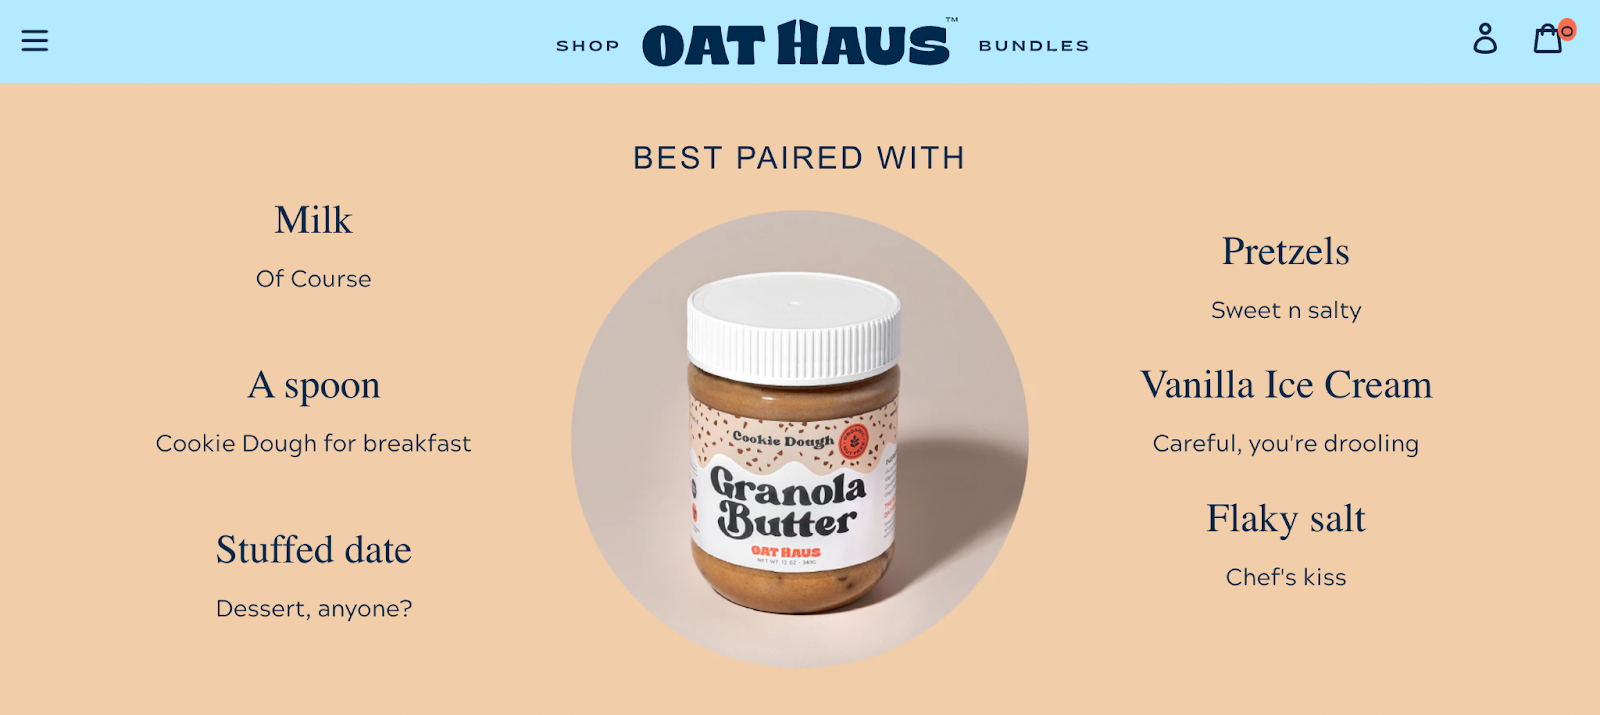 oat haus screenshot product page examples showing users how to best enjoy eating product